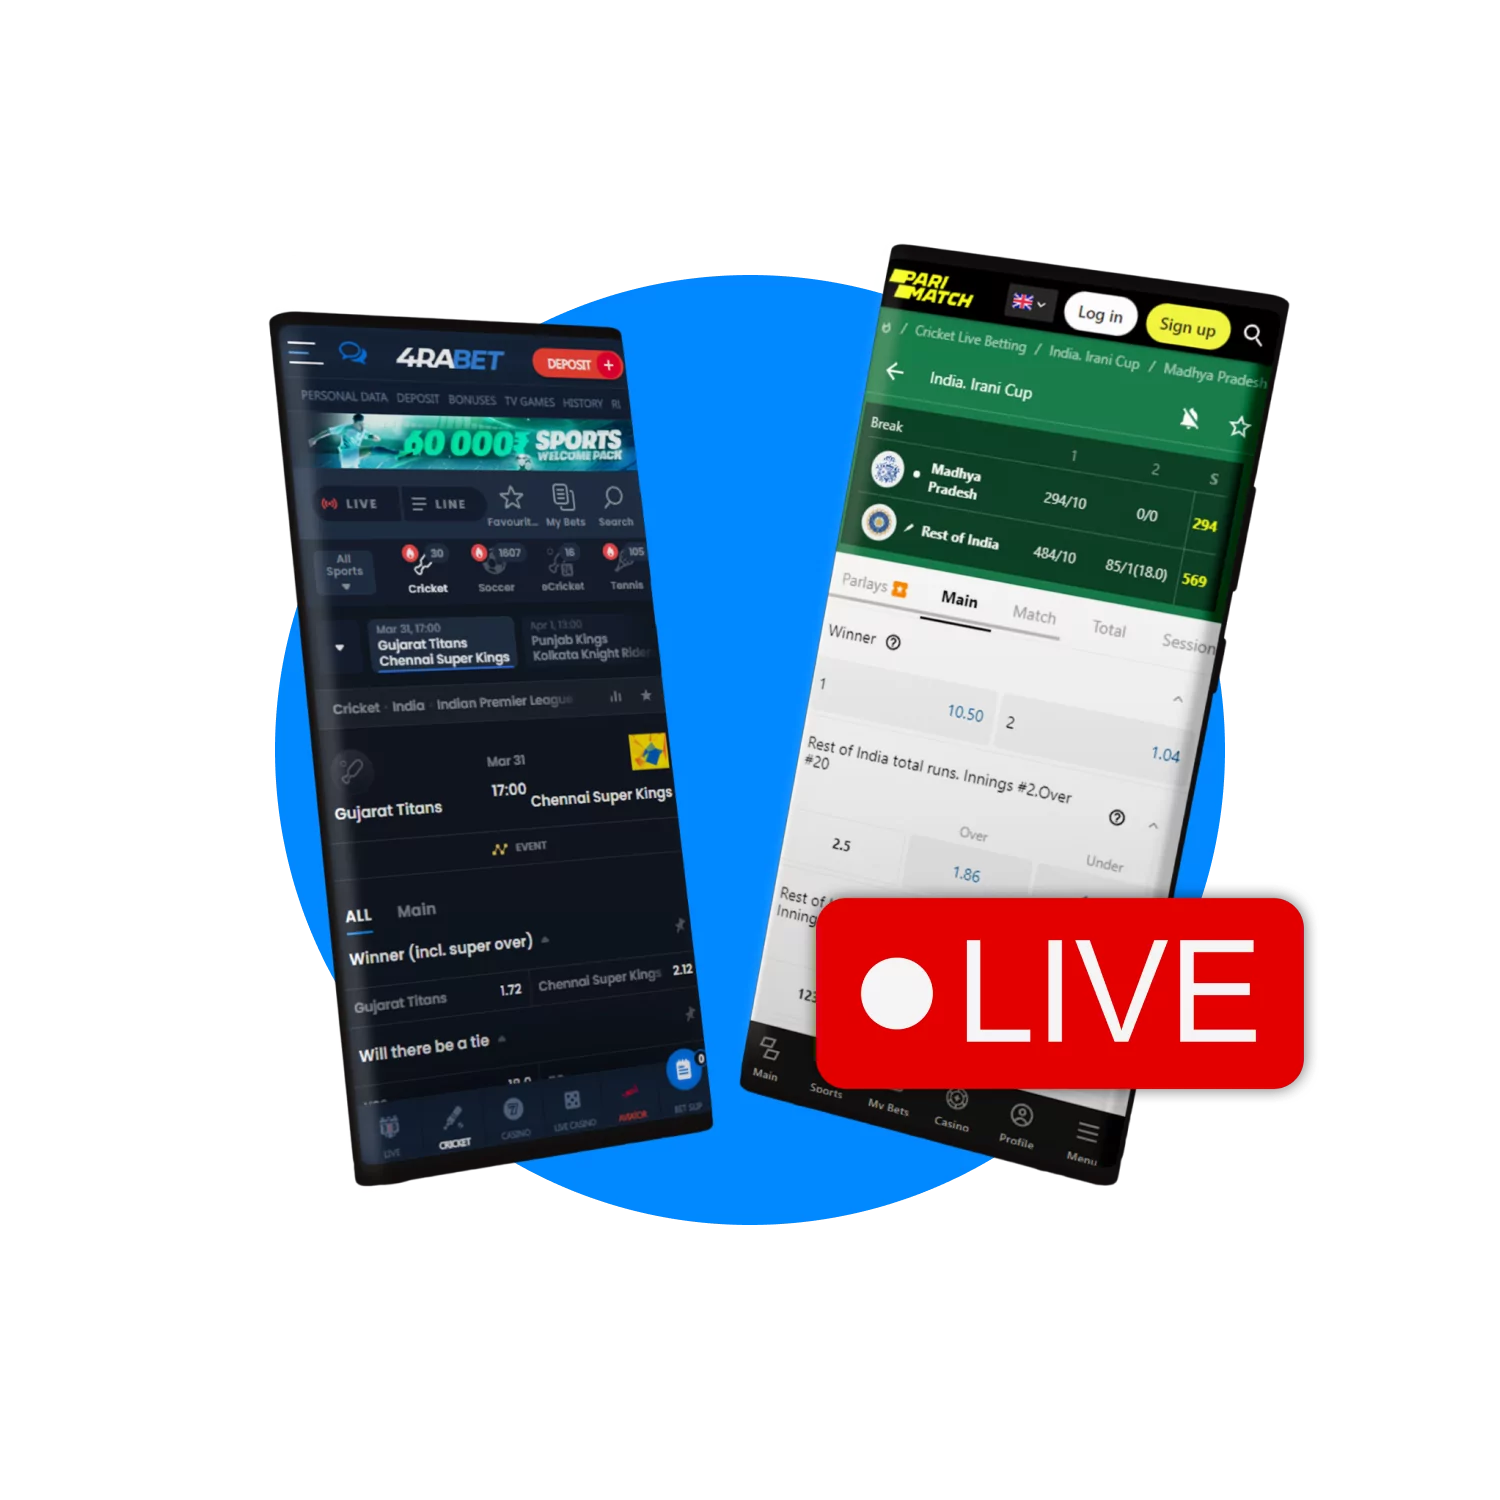 Learn what apps you can use for live betting on cricket events.